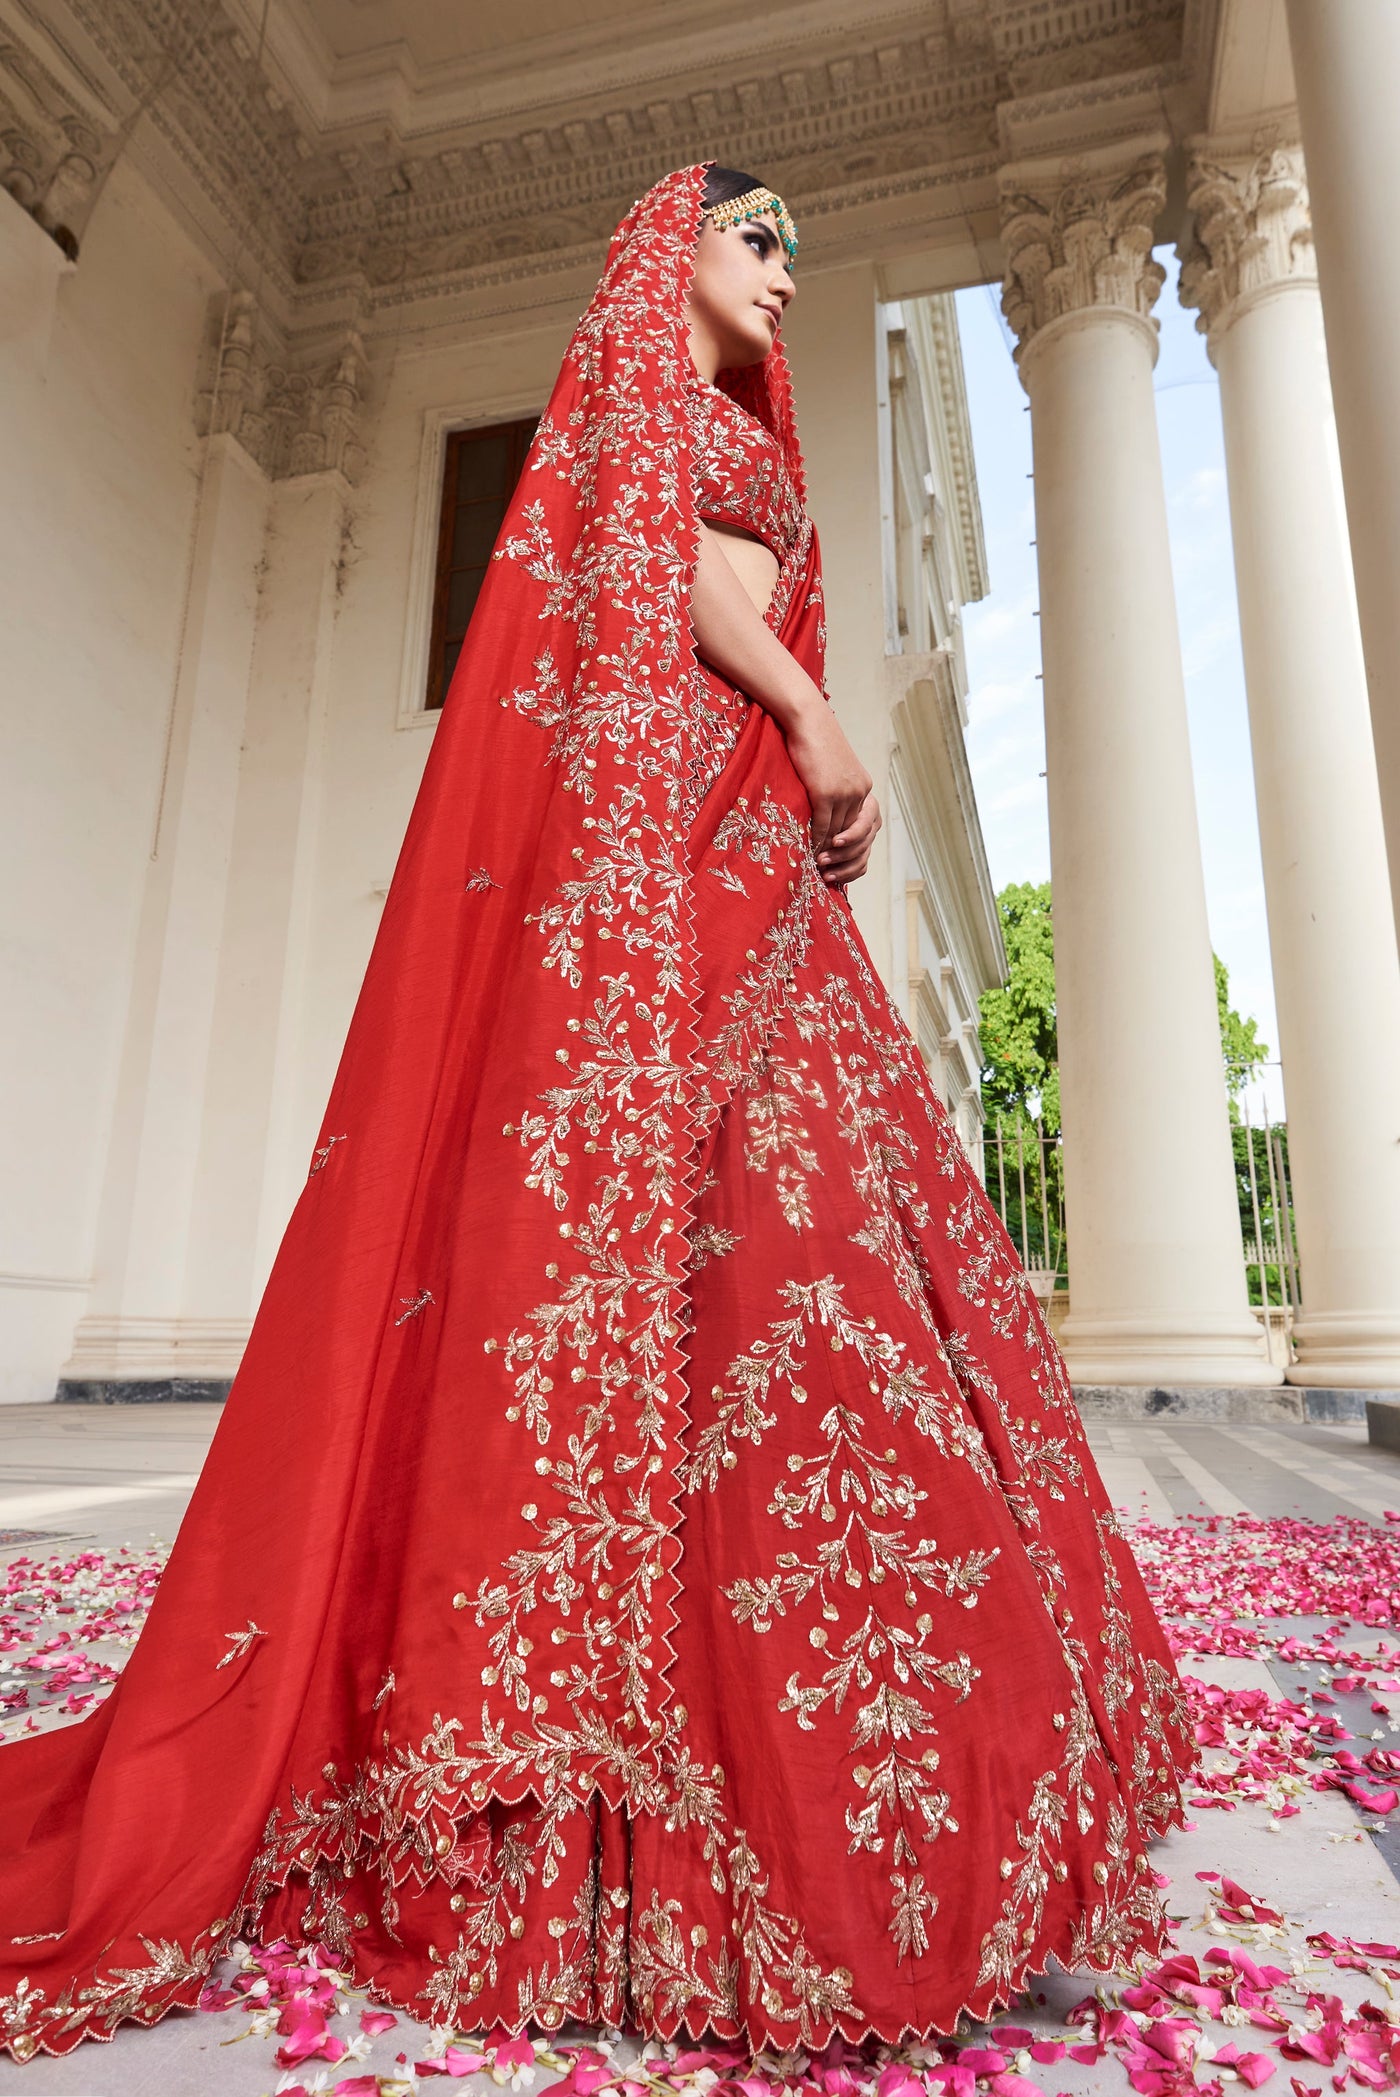 Red Scallop Lehenga with Veil - Indian Clothing in Denver, CO, Aurora, CO, Boulder, CO, Fort Collins, CO, Colorado Springs, CO, Parker, CO, Highlands Ranch, CO, Cherry Creek, CO, Centennial, CO, and Longmont, CO. Nationwide shipping USA - India Fashion X